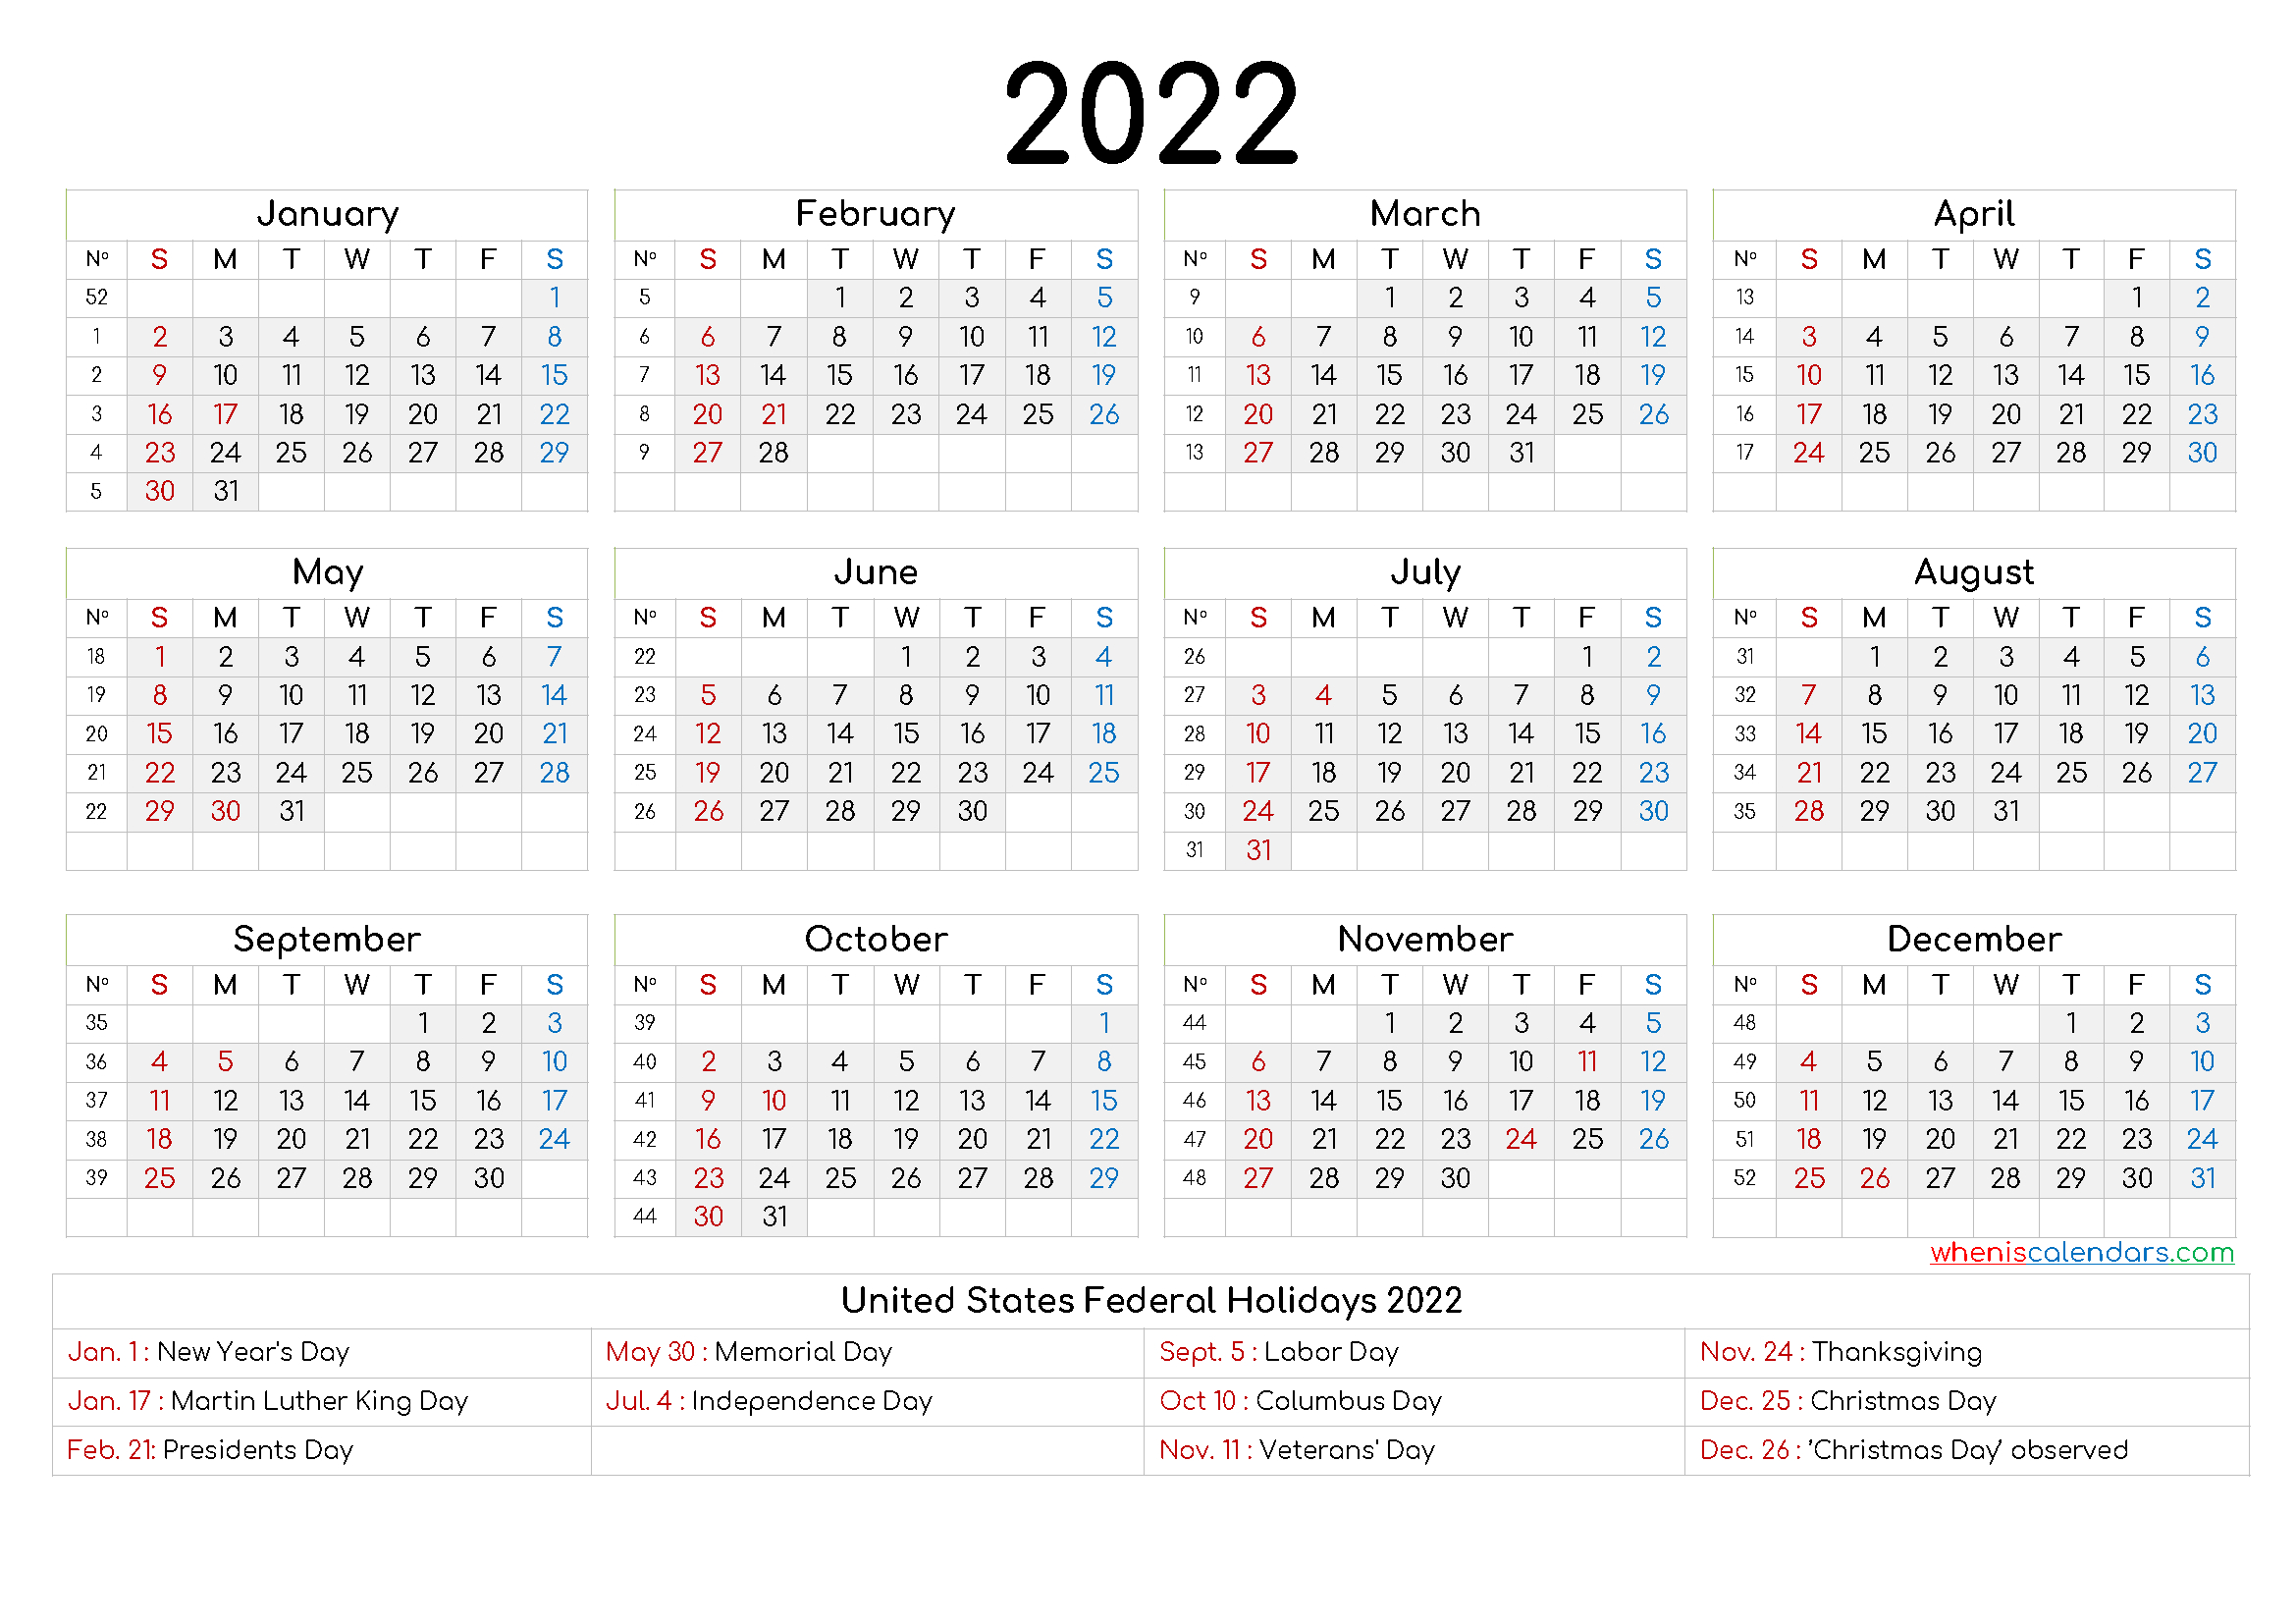 20+ Yearly Calendar 2022 - Free Download Printable Calendar Templates ️-Yearly Calendar 2022 Free Printable